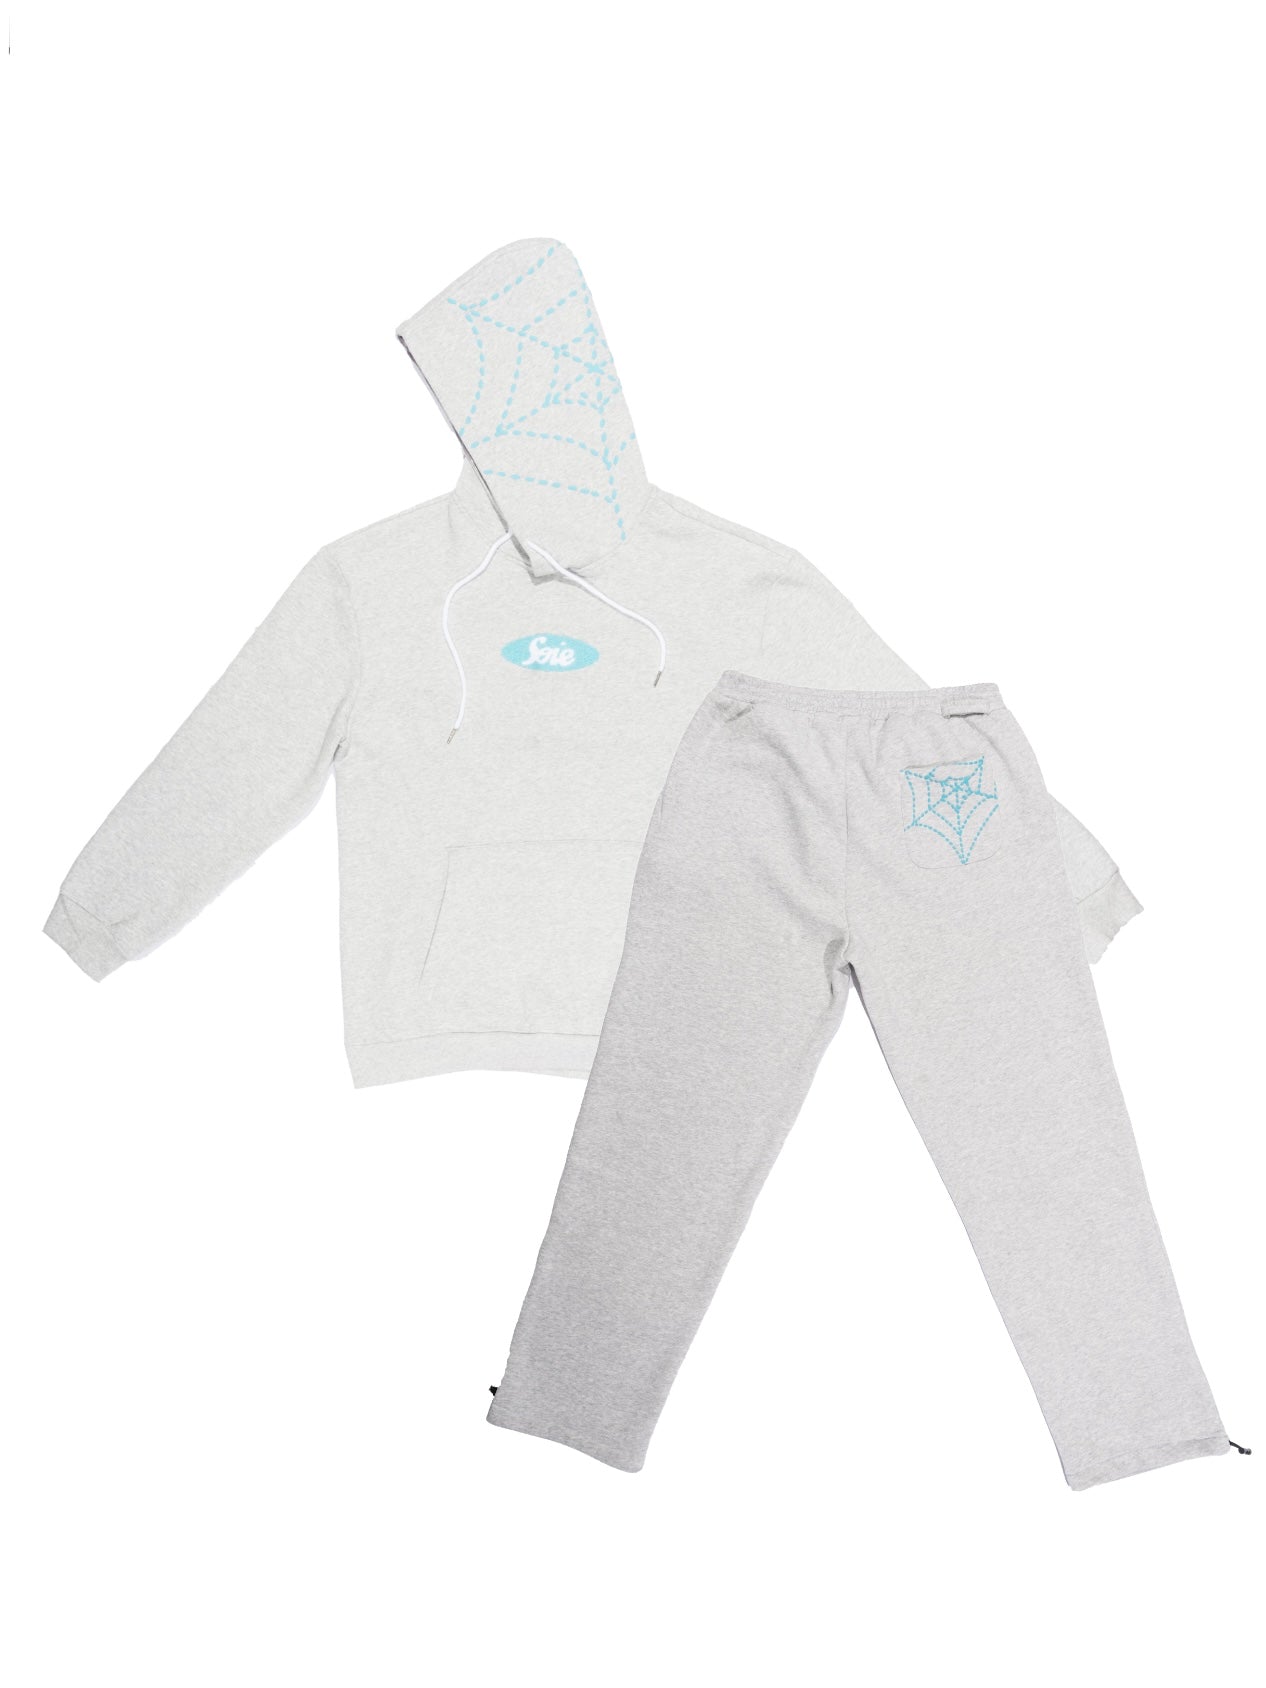 Grey Chenille Satin-Lined Sweatsuit